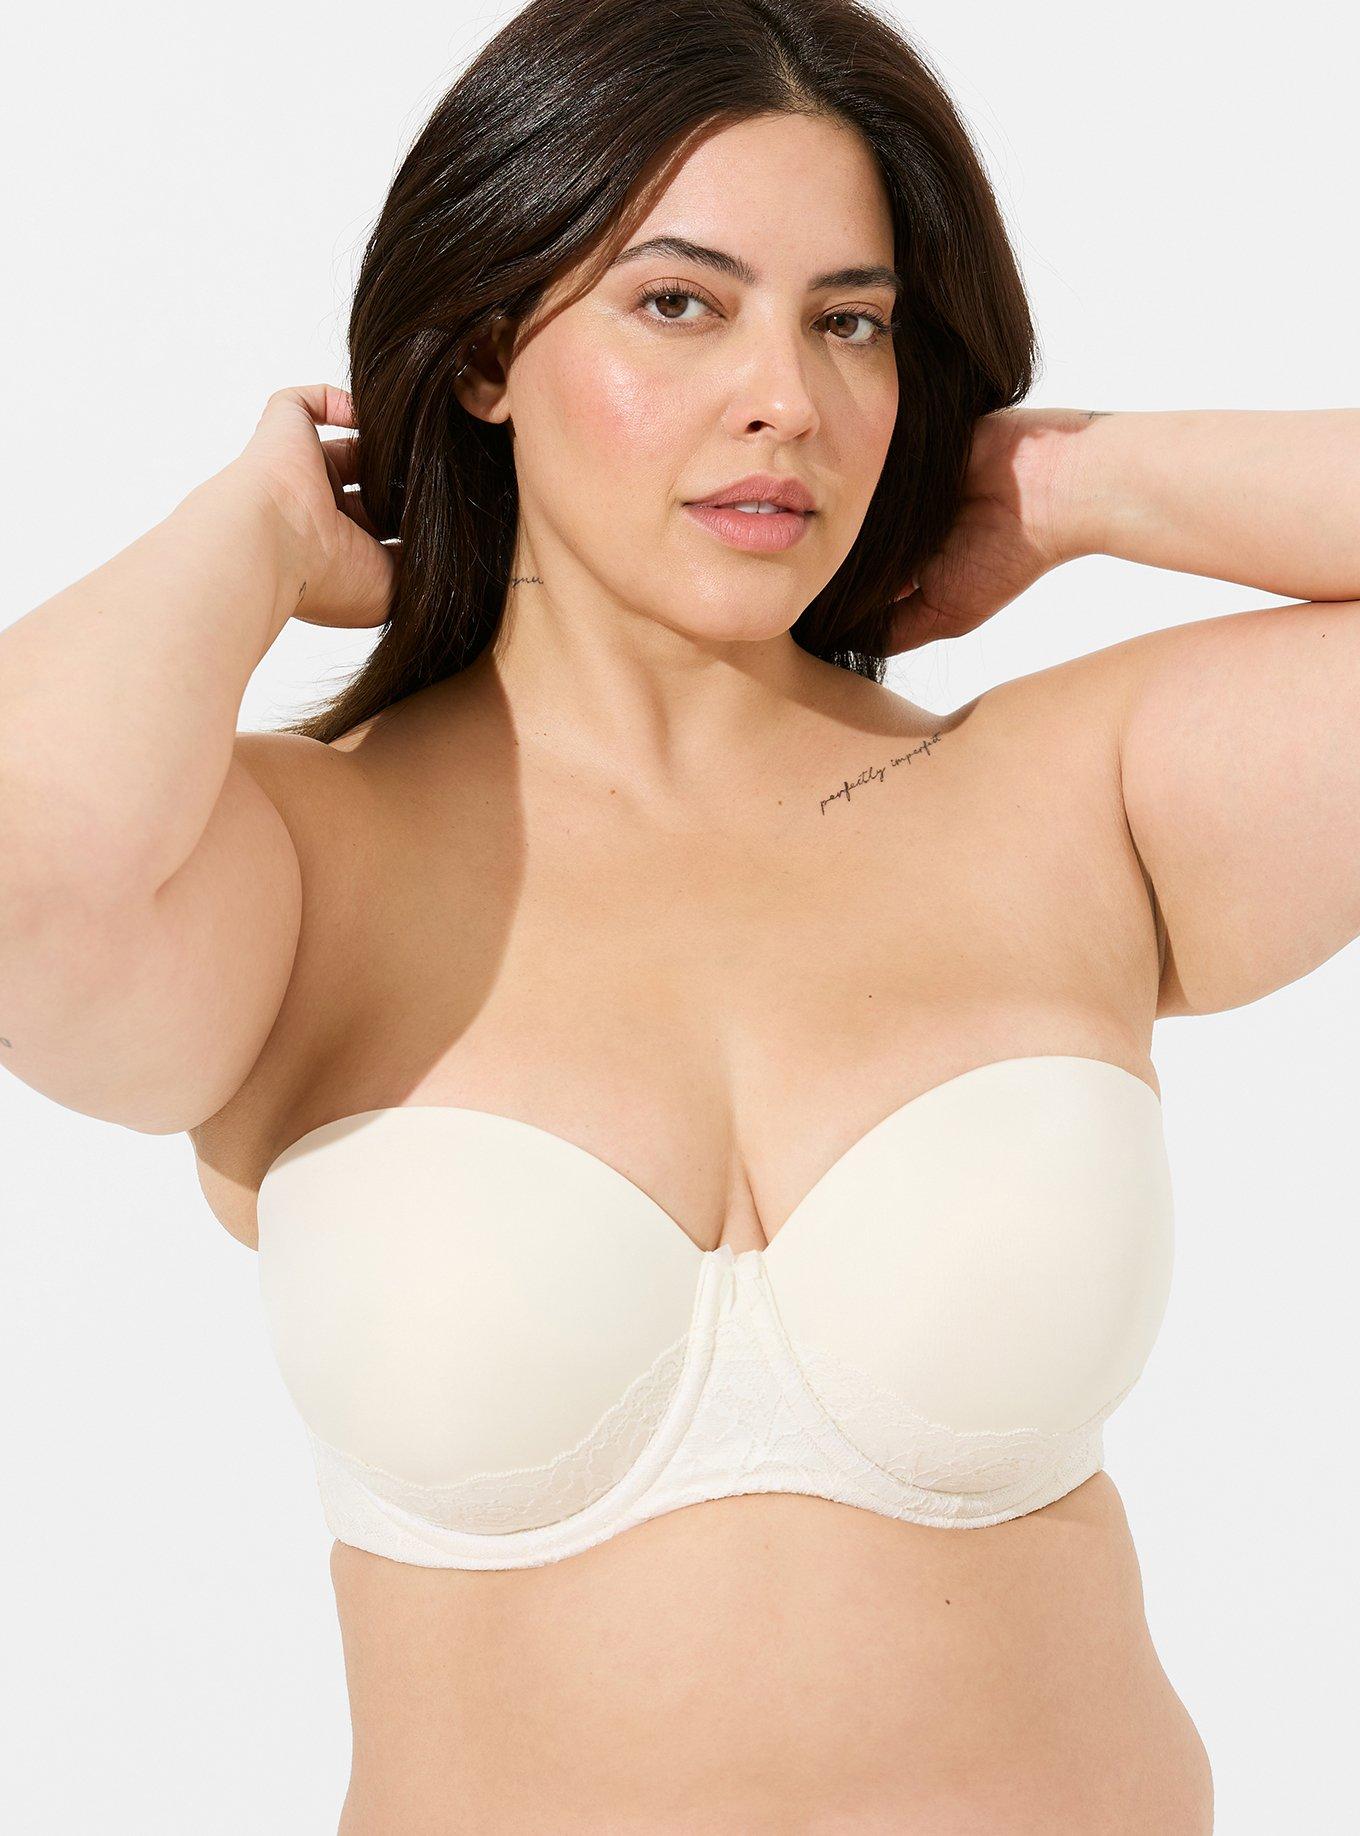 Strapless Bra Push Up for Big Bust [Wedding or Party] [Clear Straps]  Strapless Bras for Women 36-44 C/D/DD/DDD/G